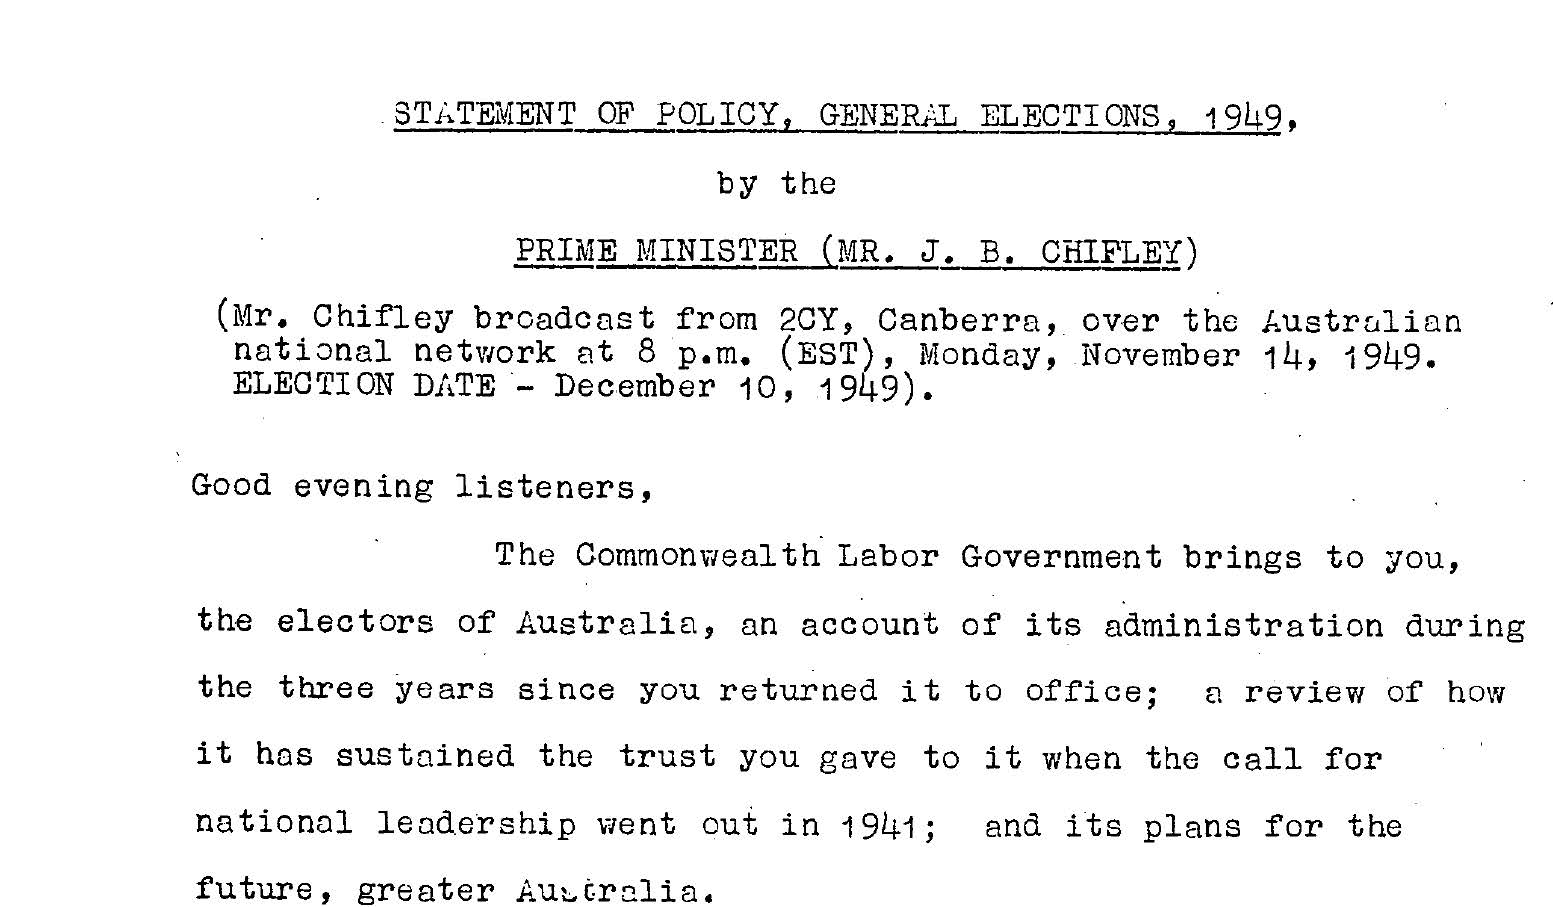 Statement of Policy General Elections, 1948 by the Prime Minister